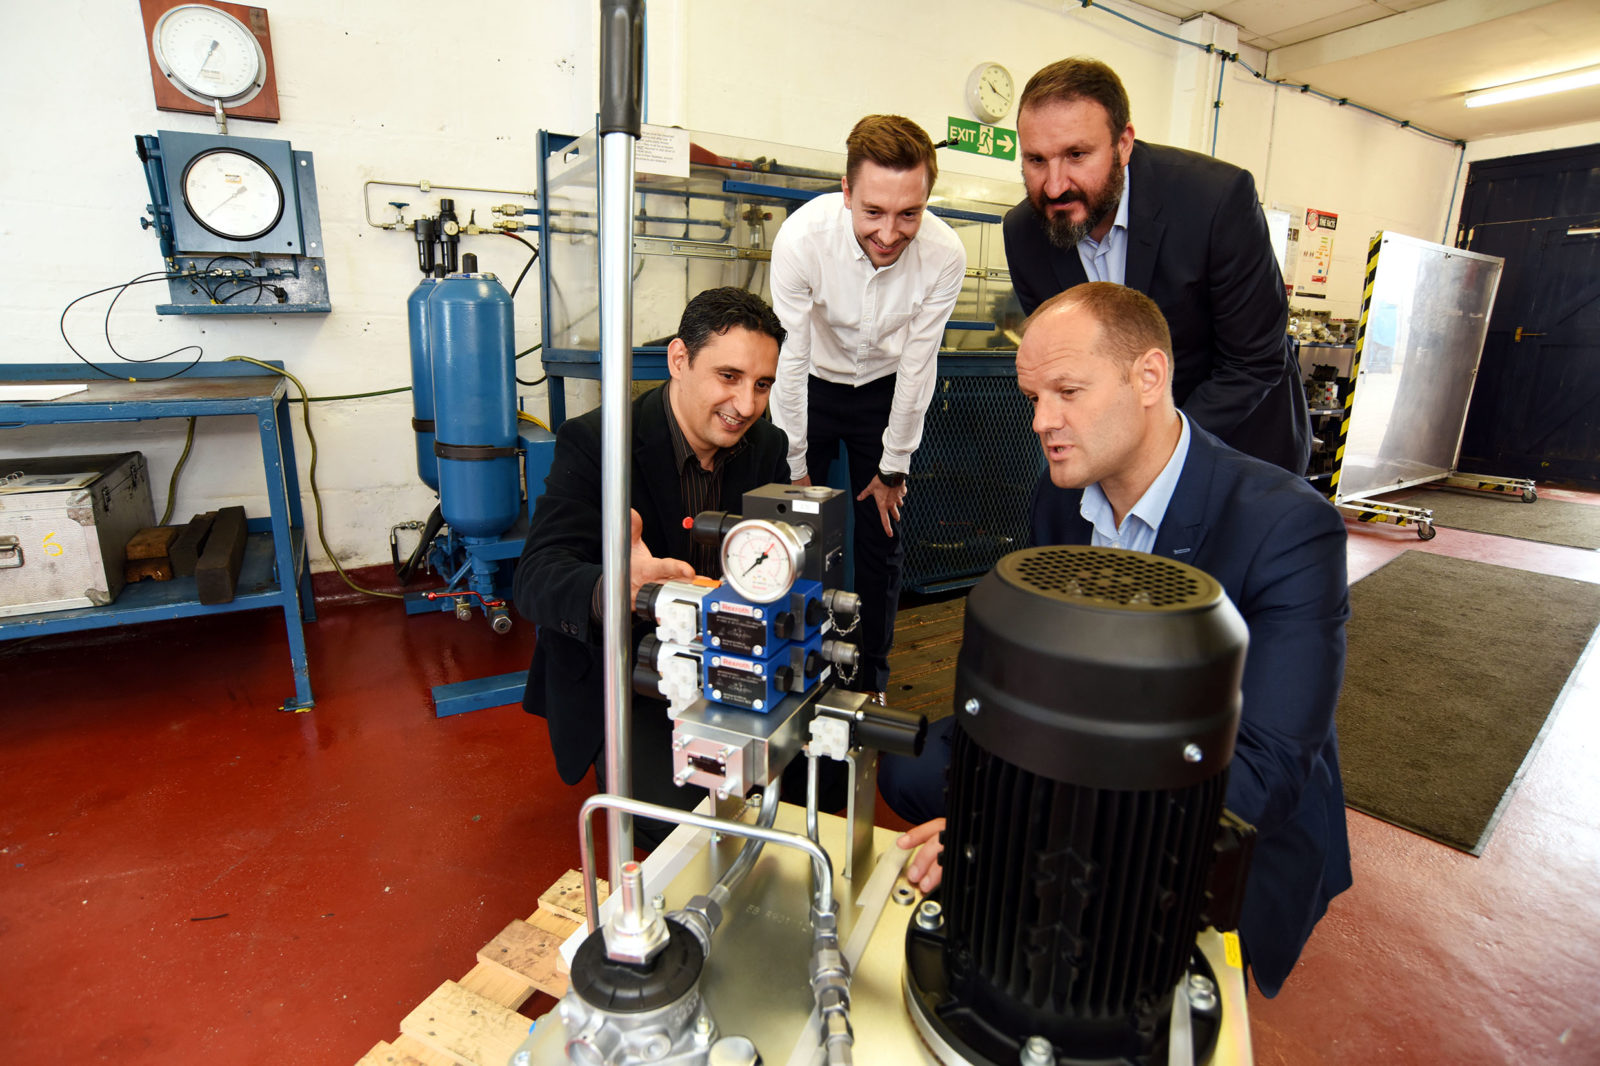 University support helps engineering firm expansion